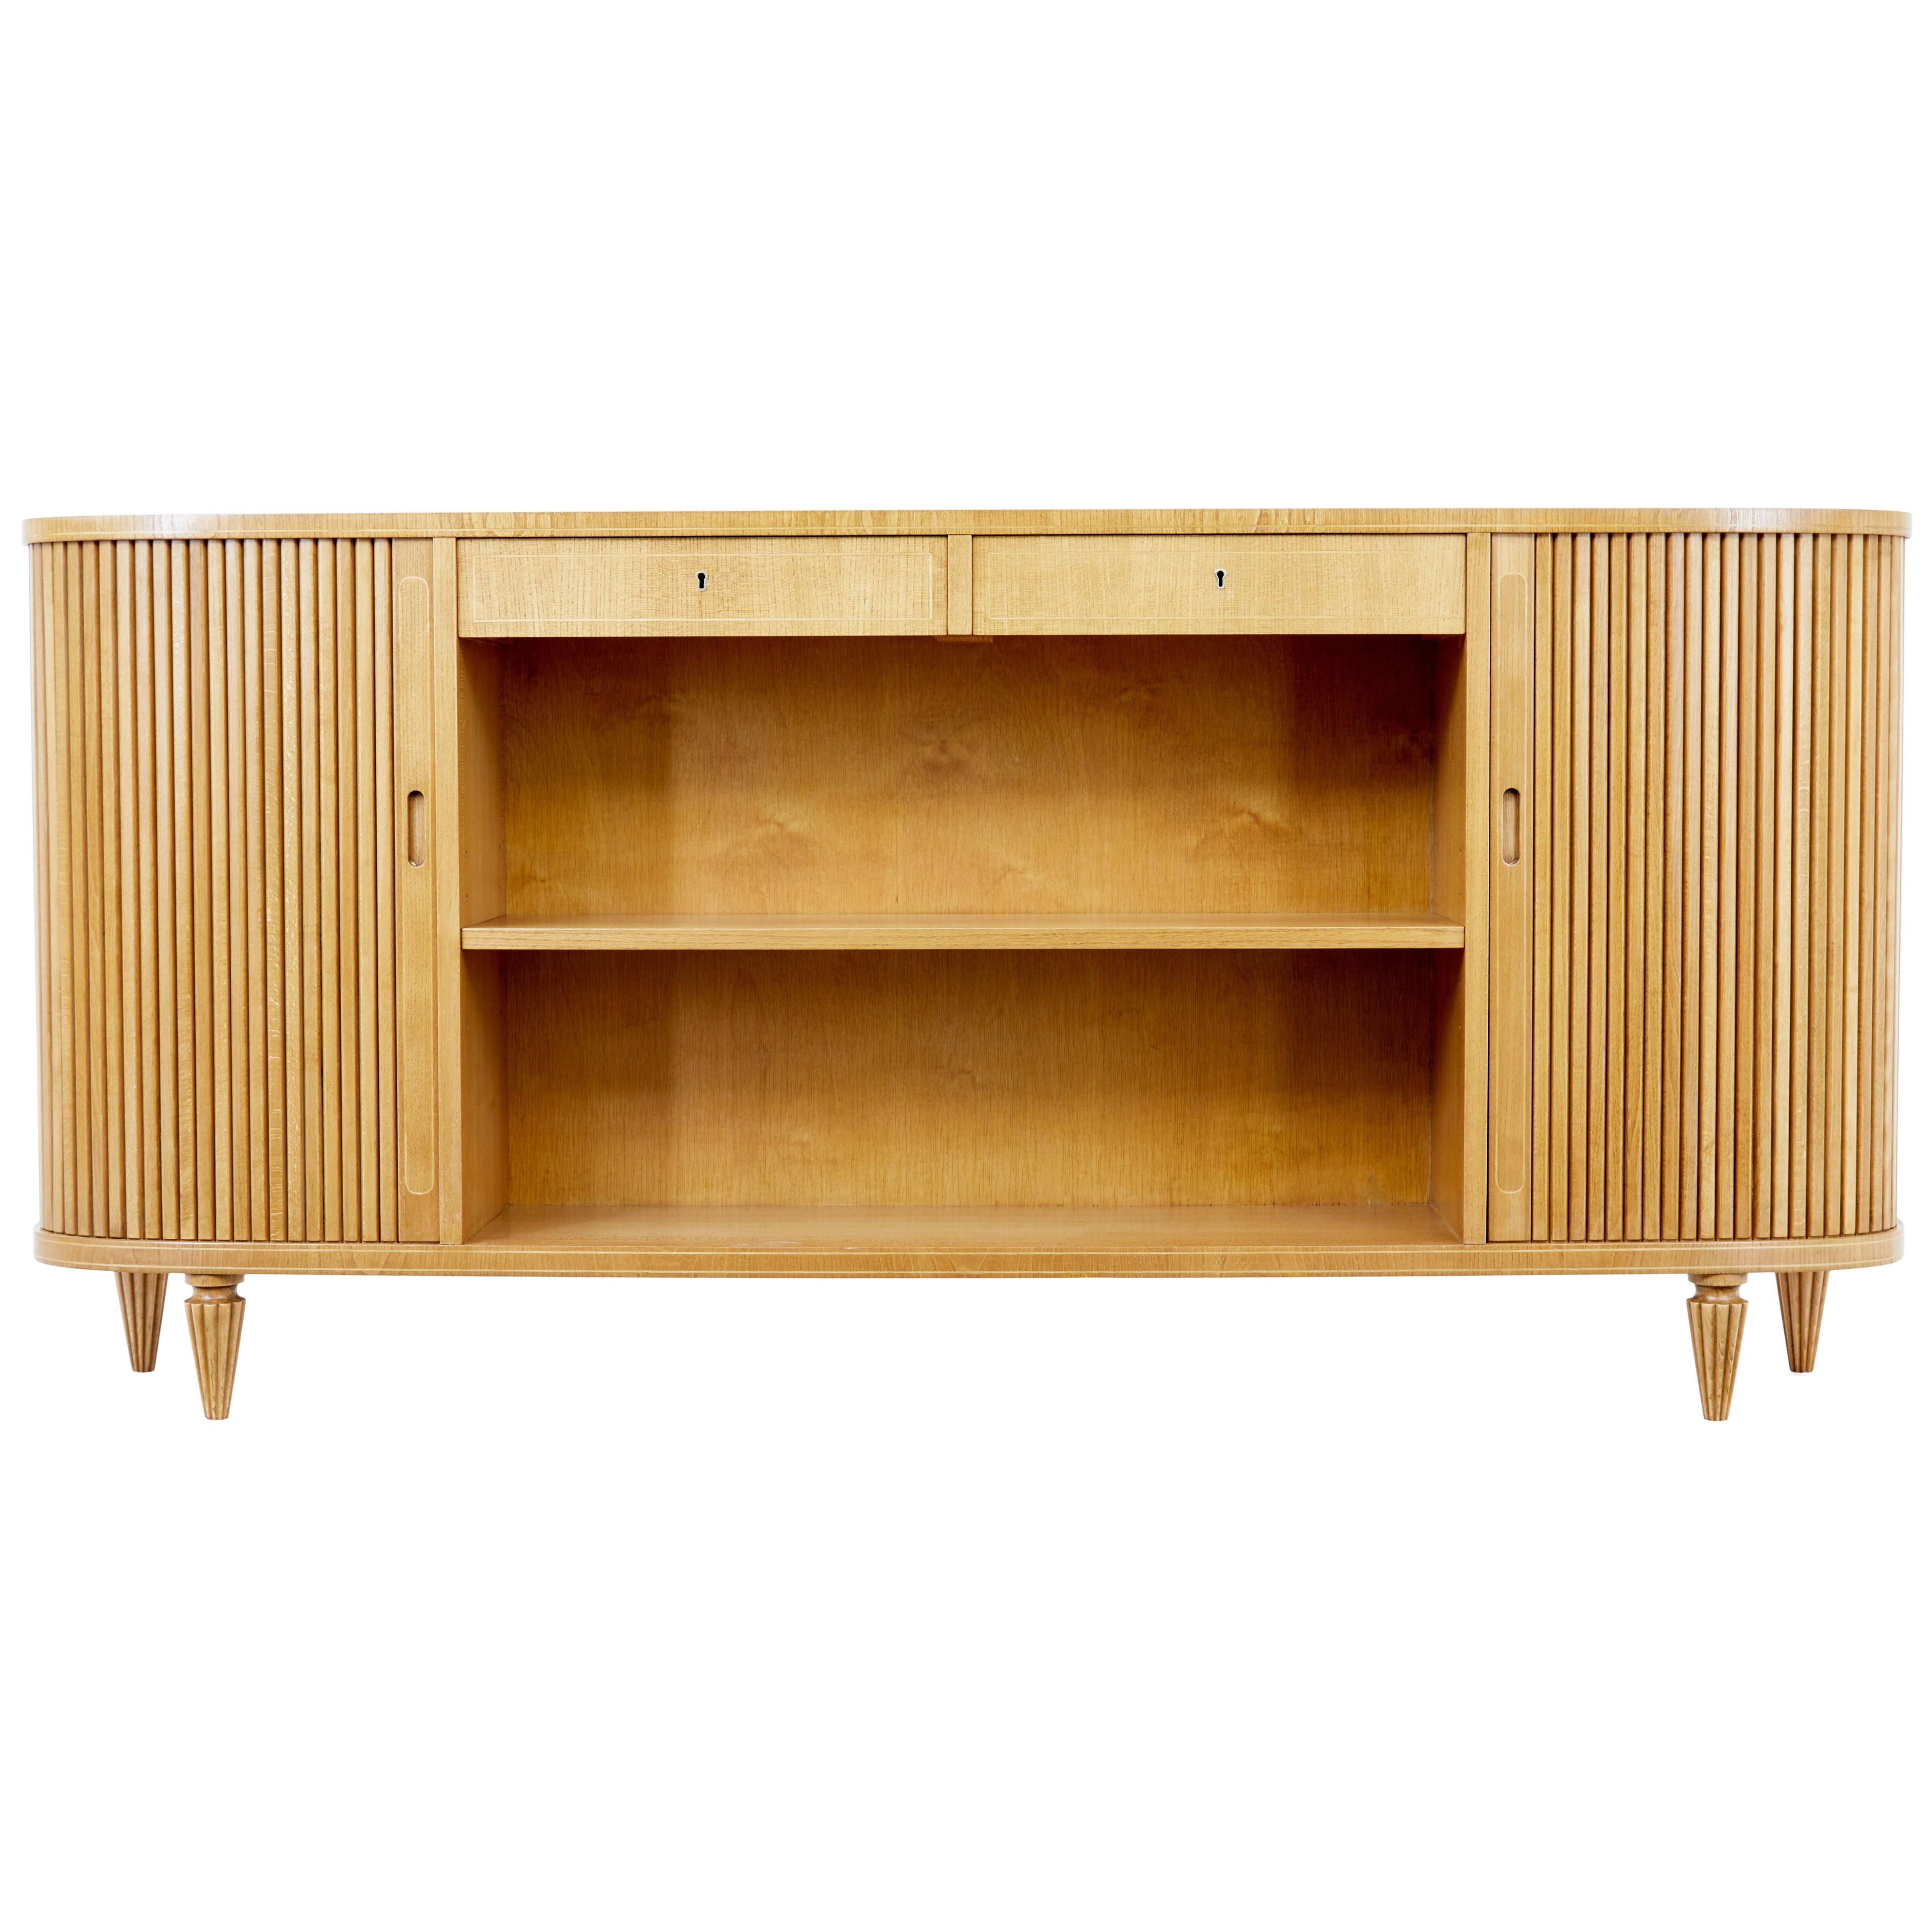 SWEDISH MID 20TH CENTURY ELM TAMBOUR FRONT LOW OPEN BOOKCASE